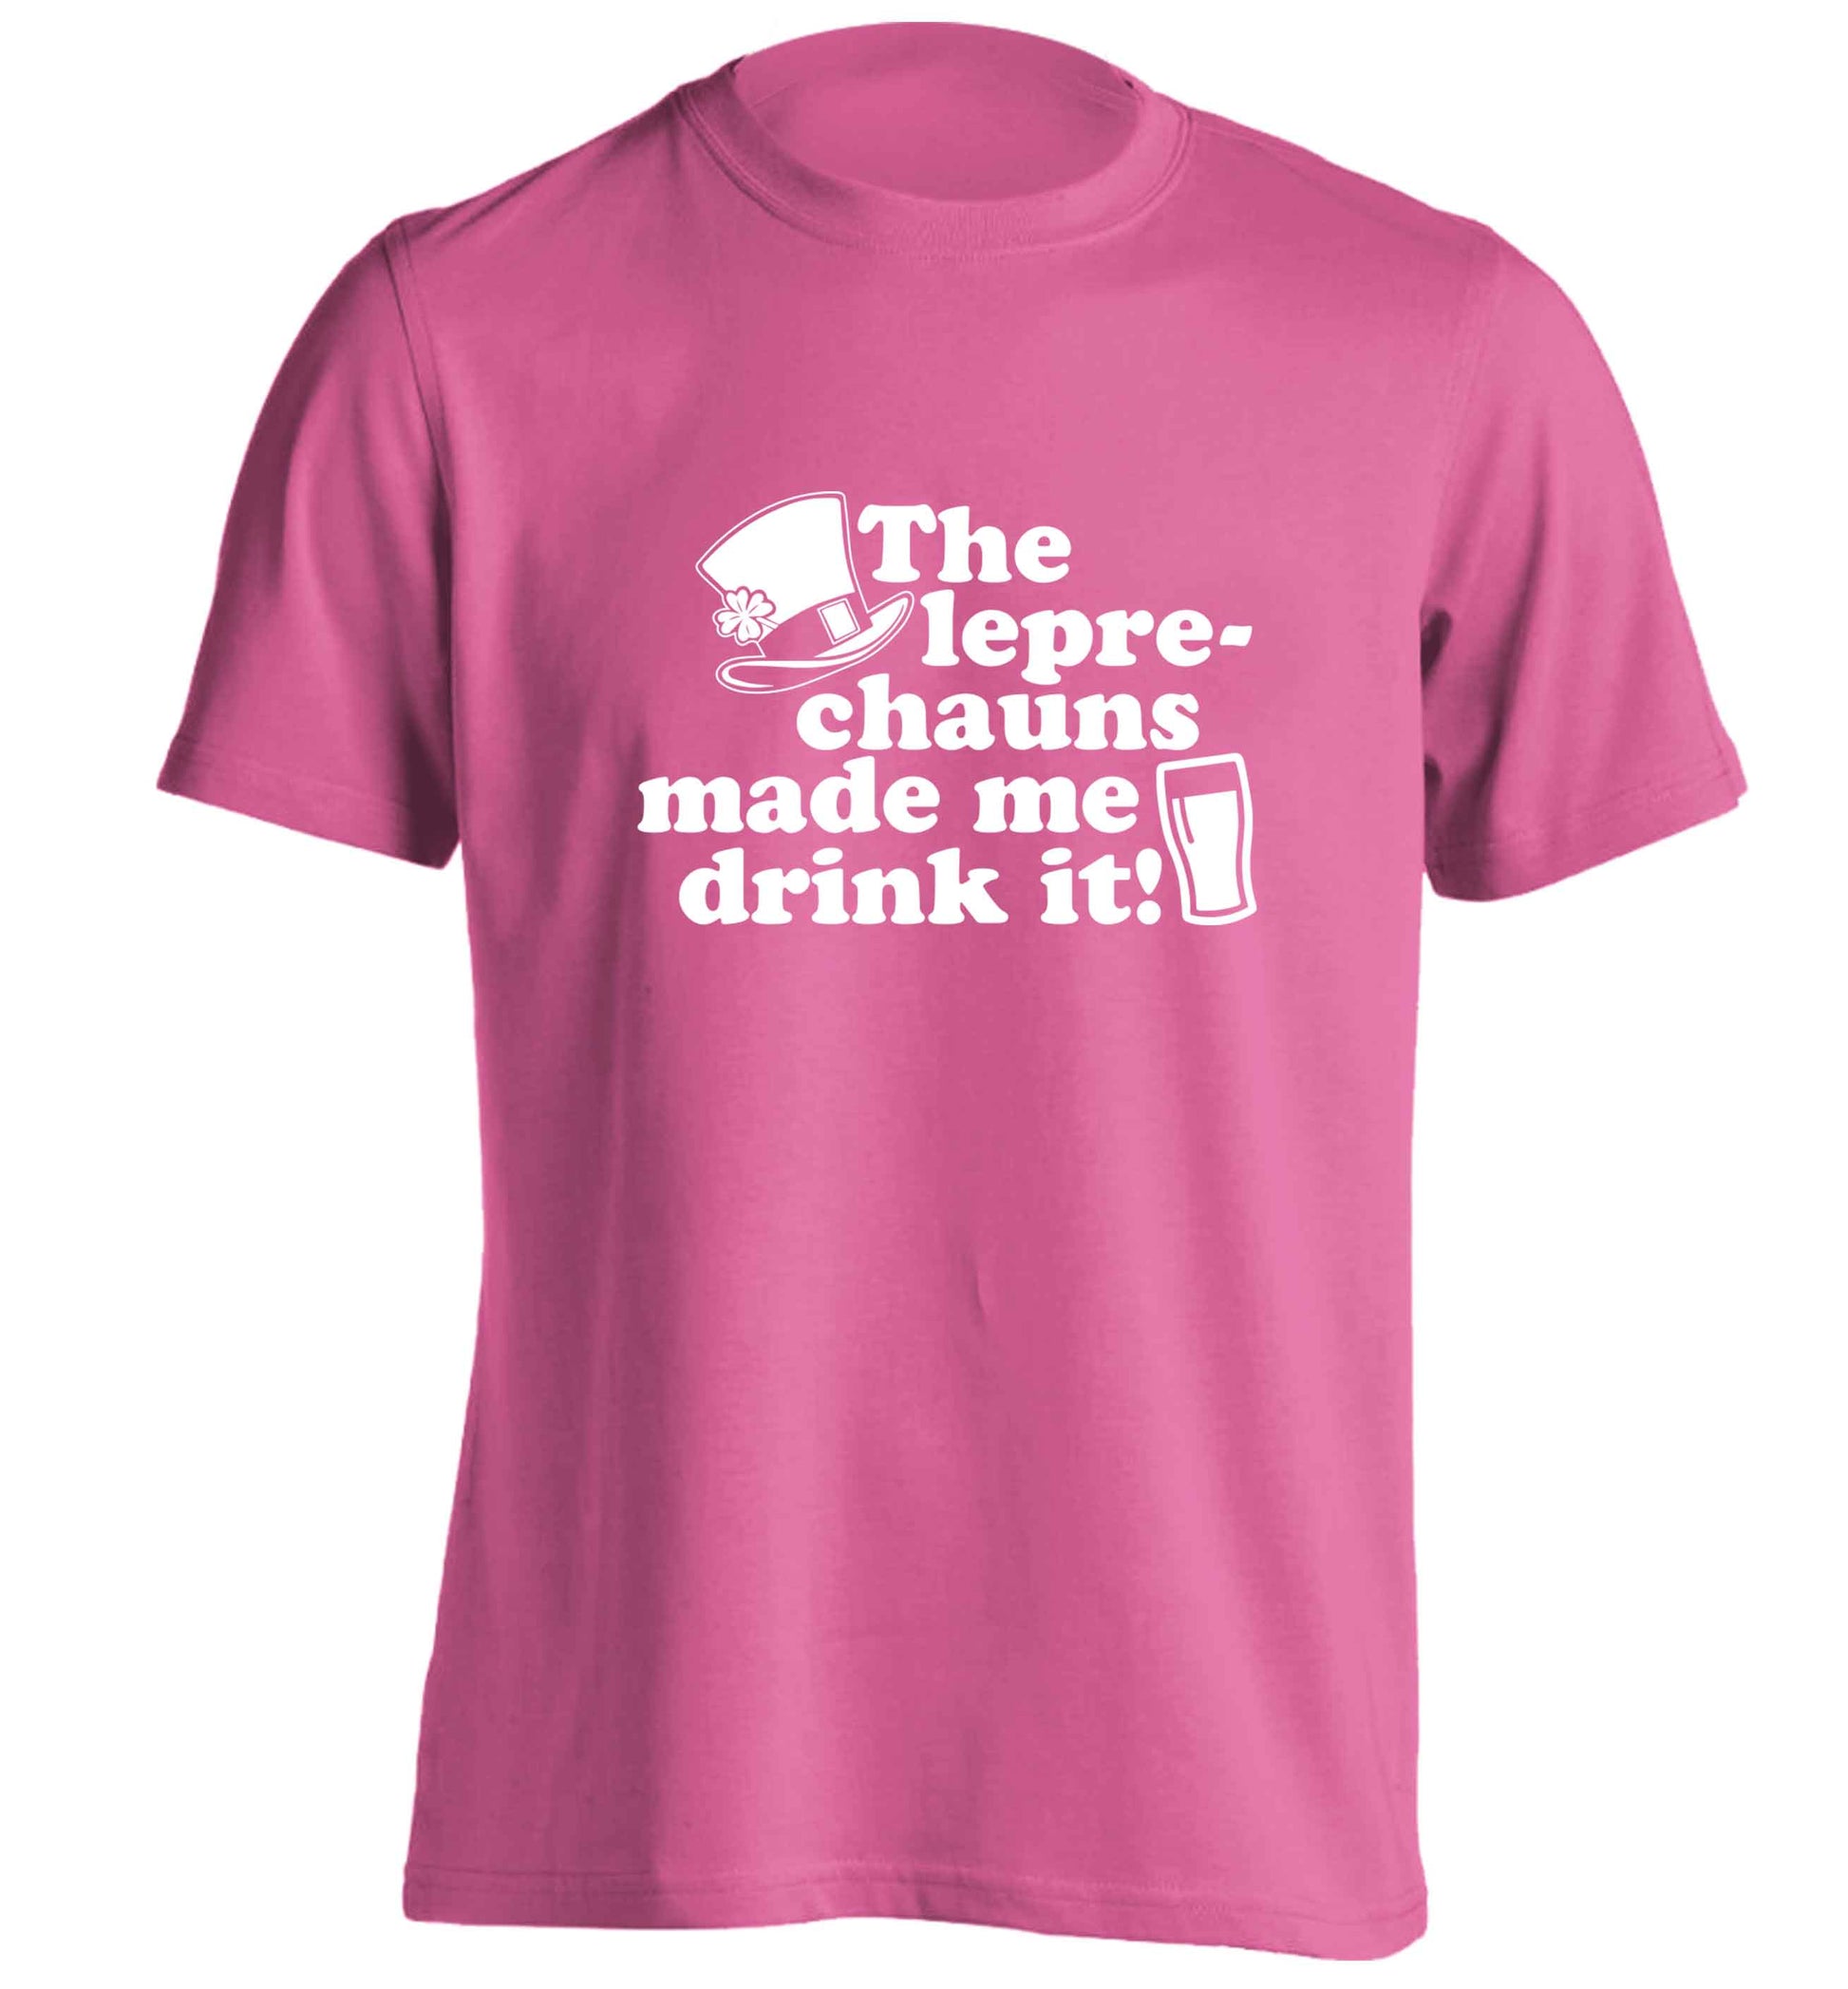 The leprechauns made me drink it adults unisex pink Tshirt 2XL